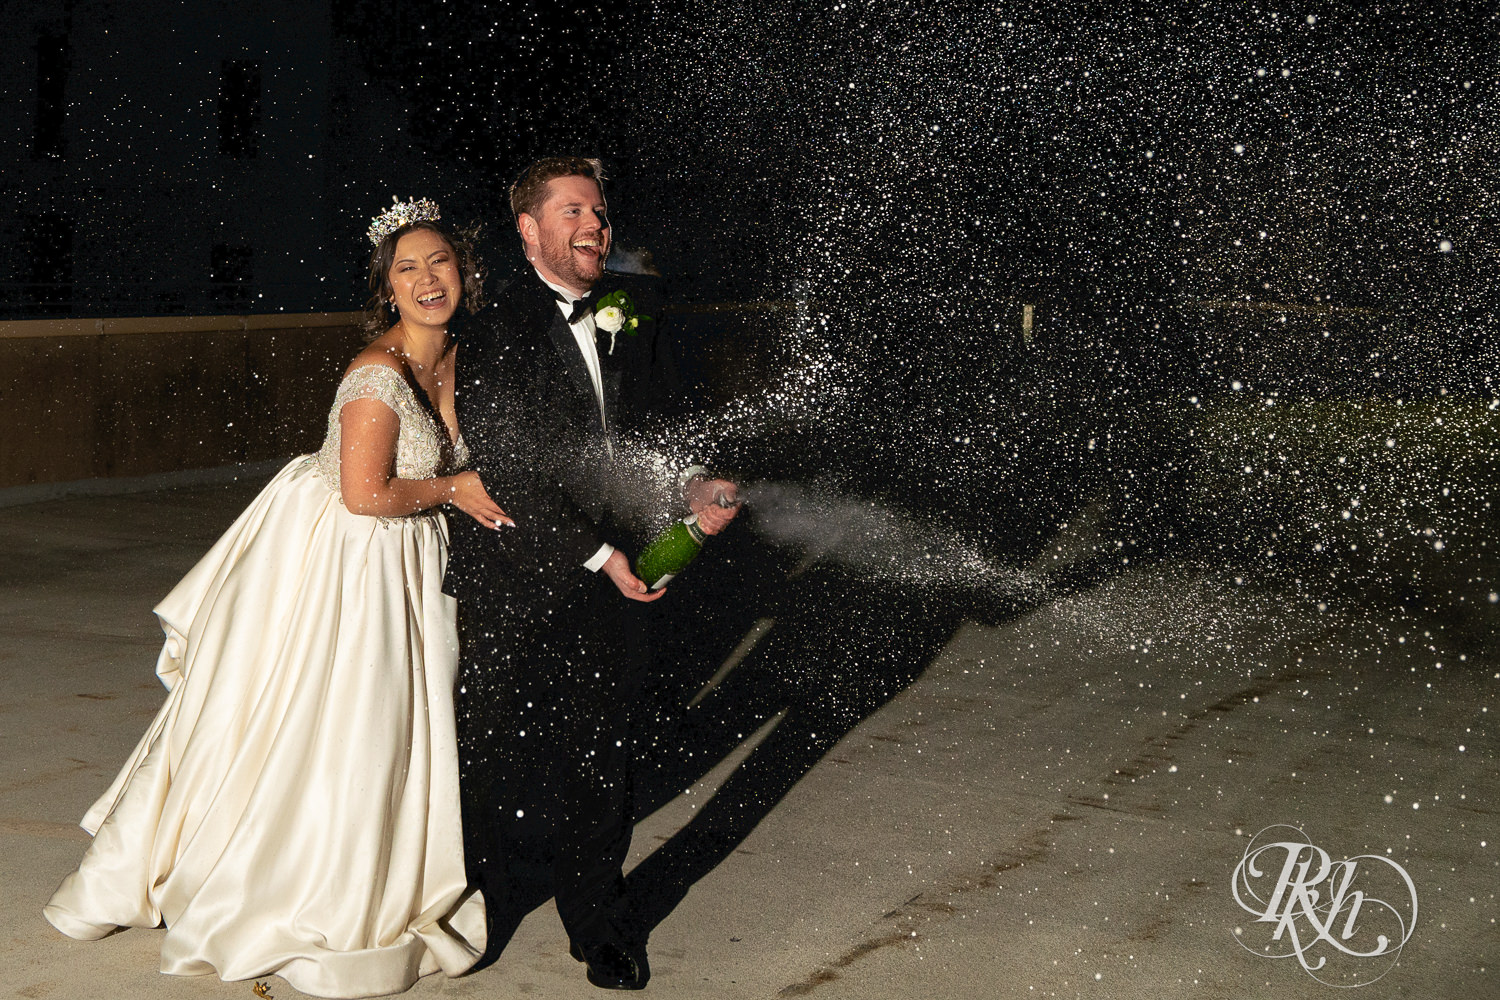 Hmong bride and groom spray champagne on a rooftop in Saint Paul, Minnesota.